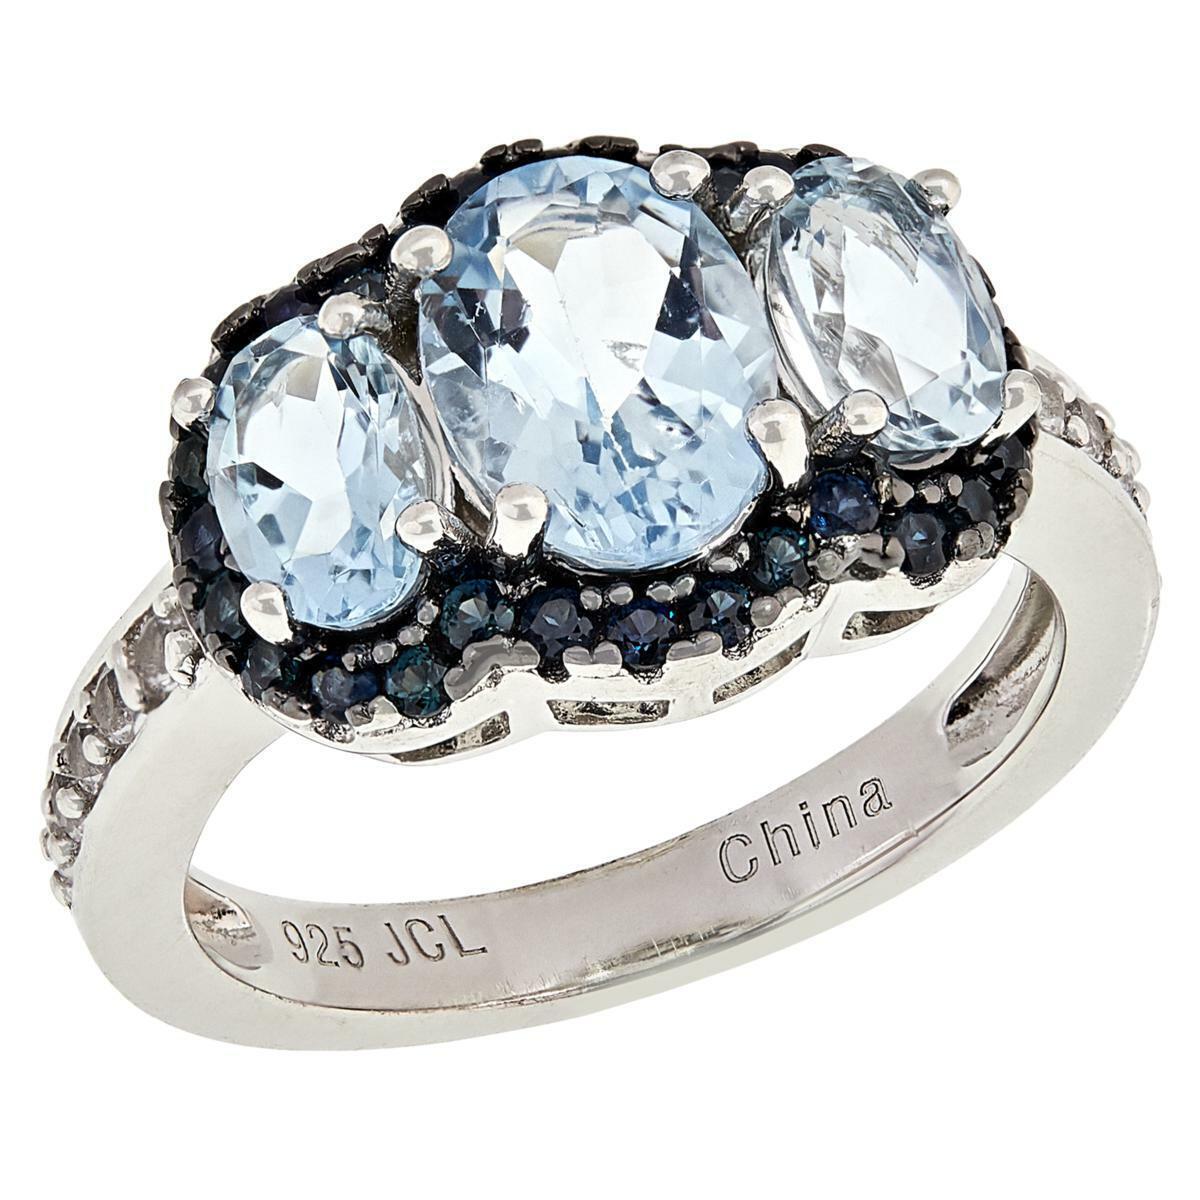 Colleen Lopez Sterling Silver Oval Sapphire, Aquamarine 3 Stone Ring, Size 7